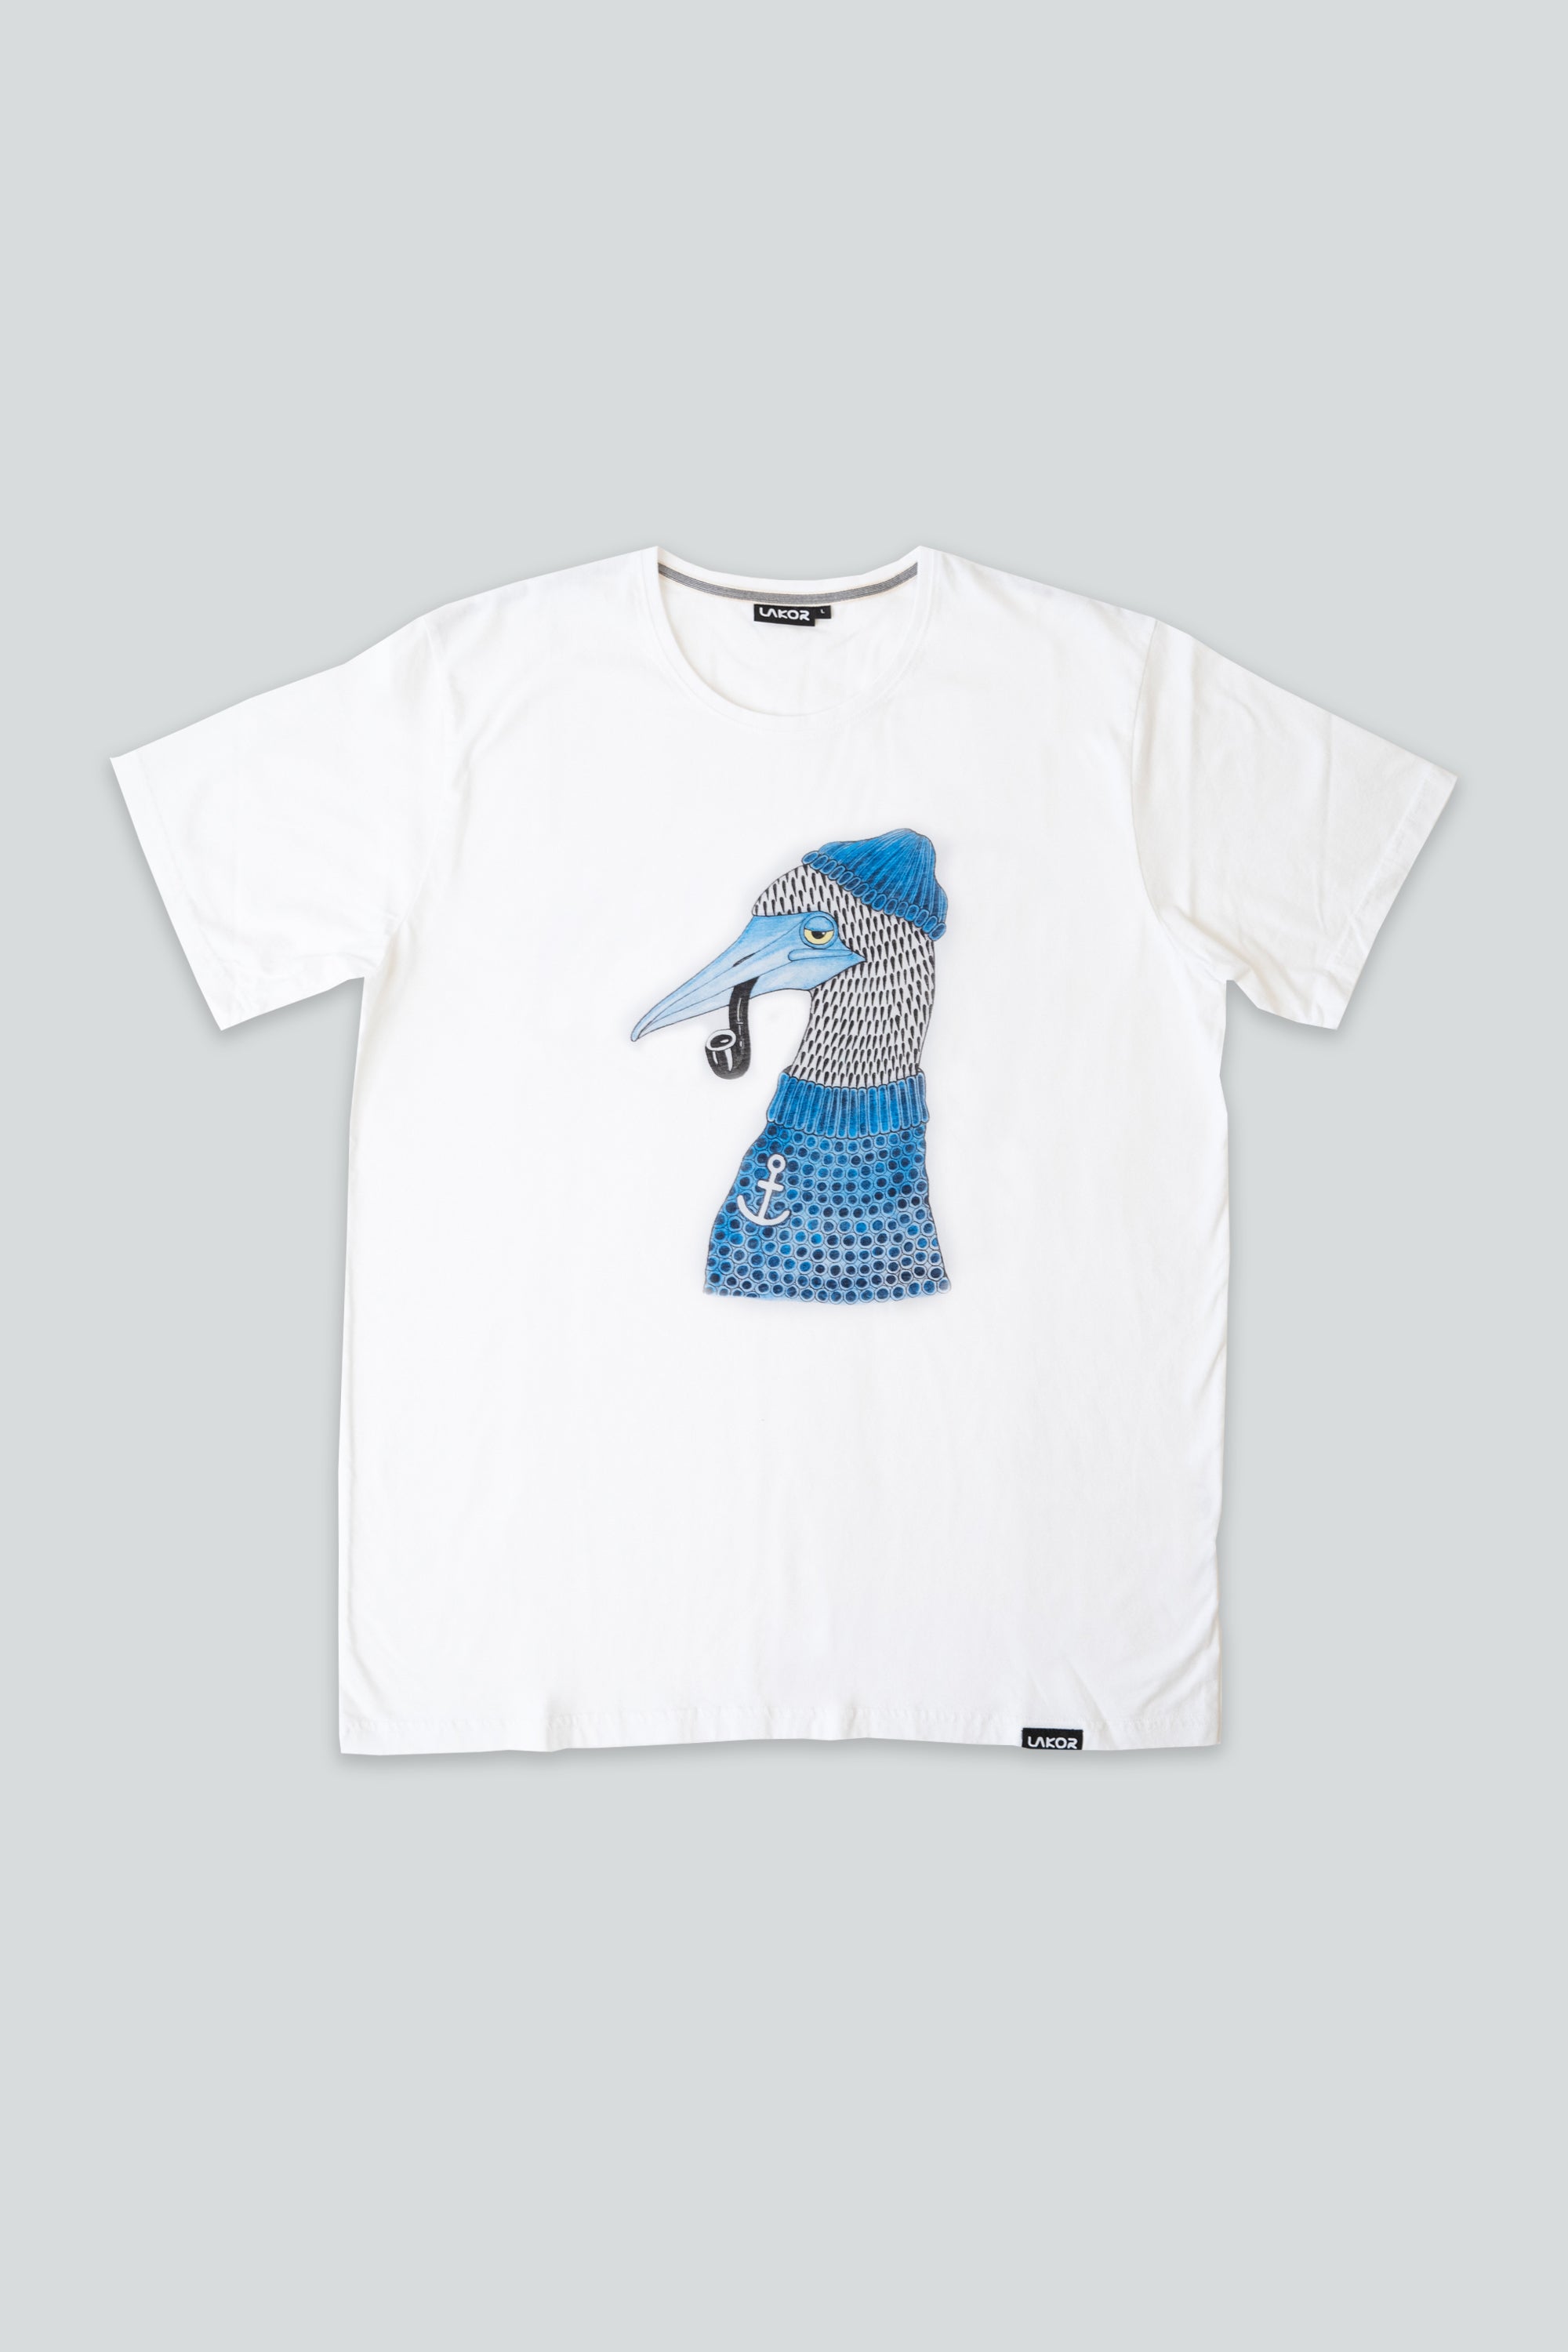 Lazy Booby T-shirt (White)